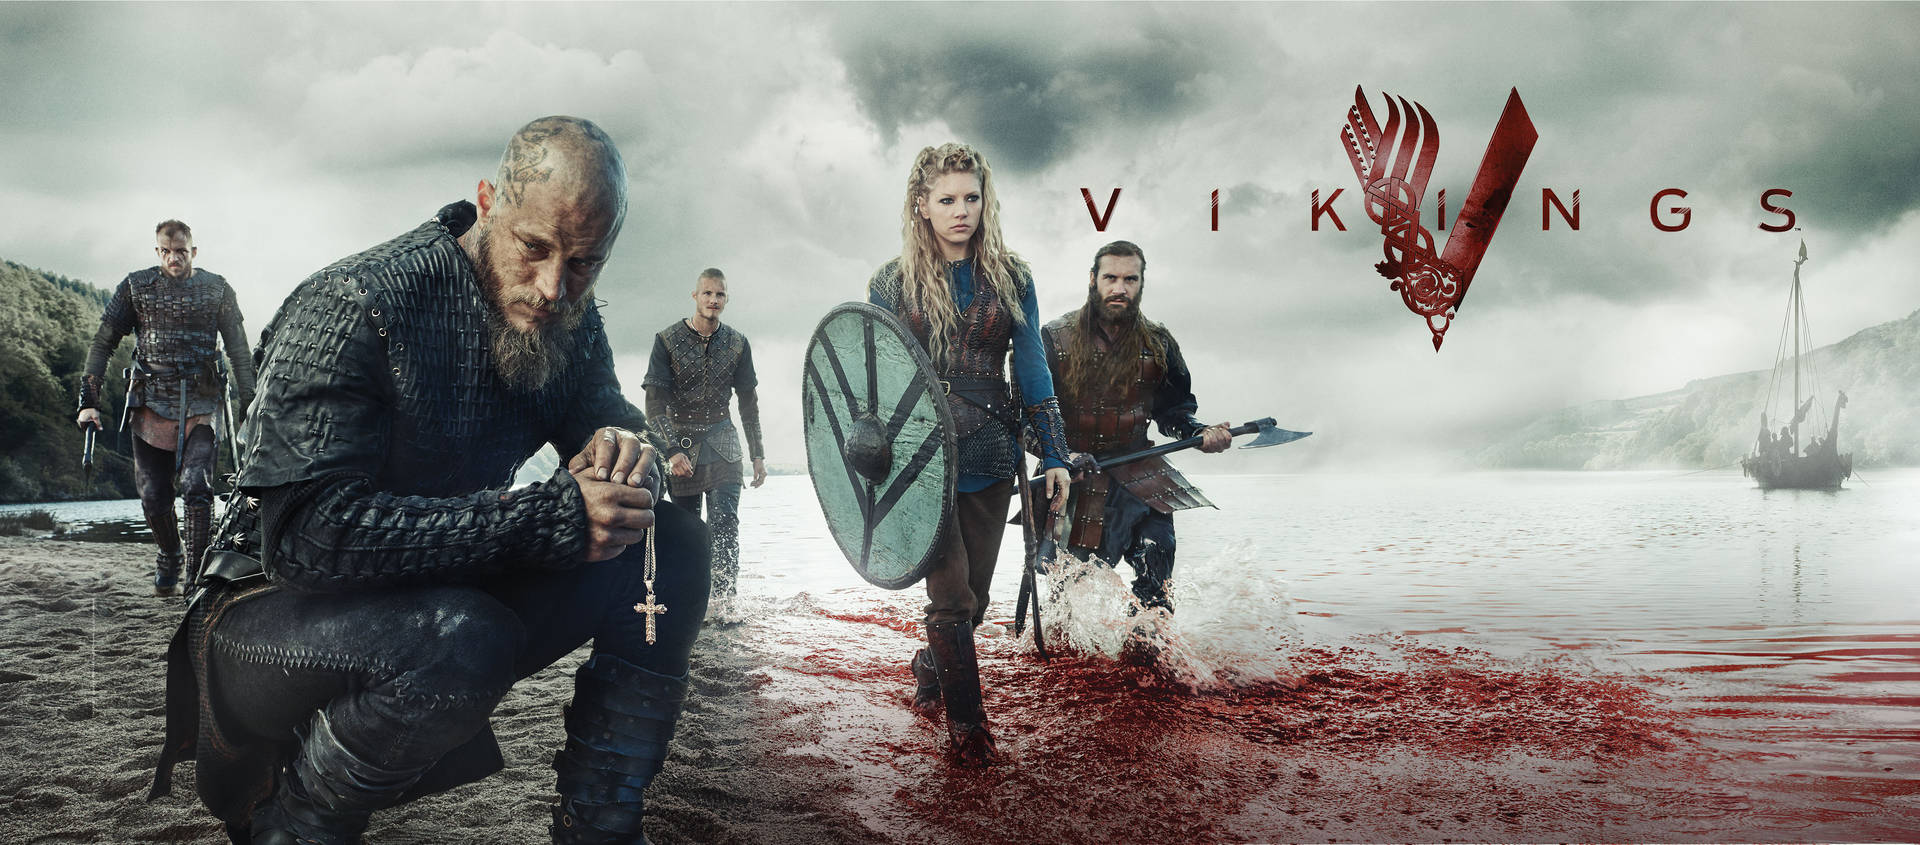 Viking 3826X1683 Wallpaper and Background Image